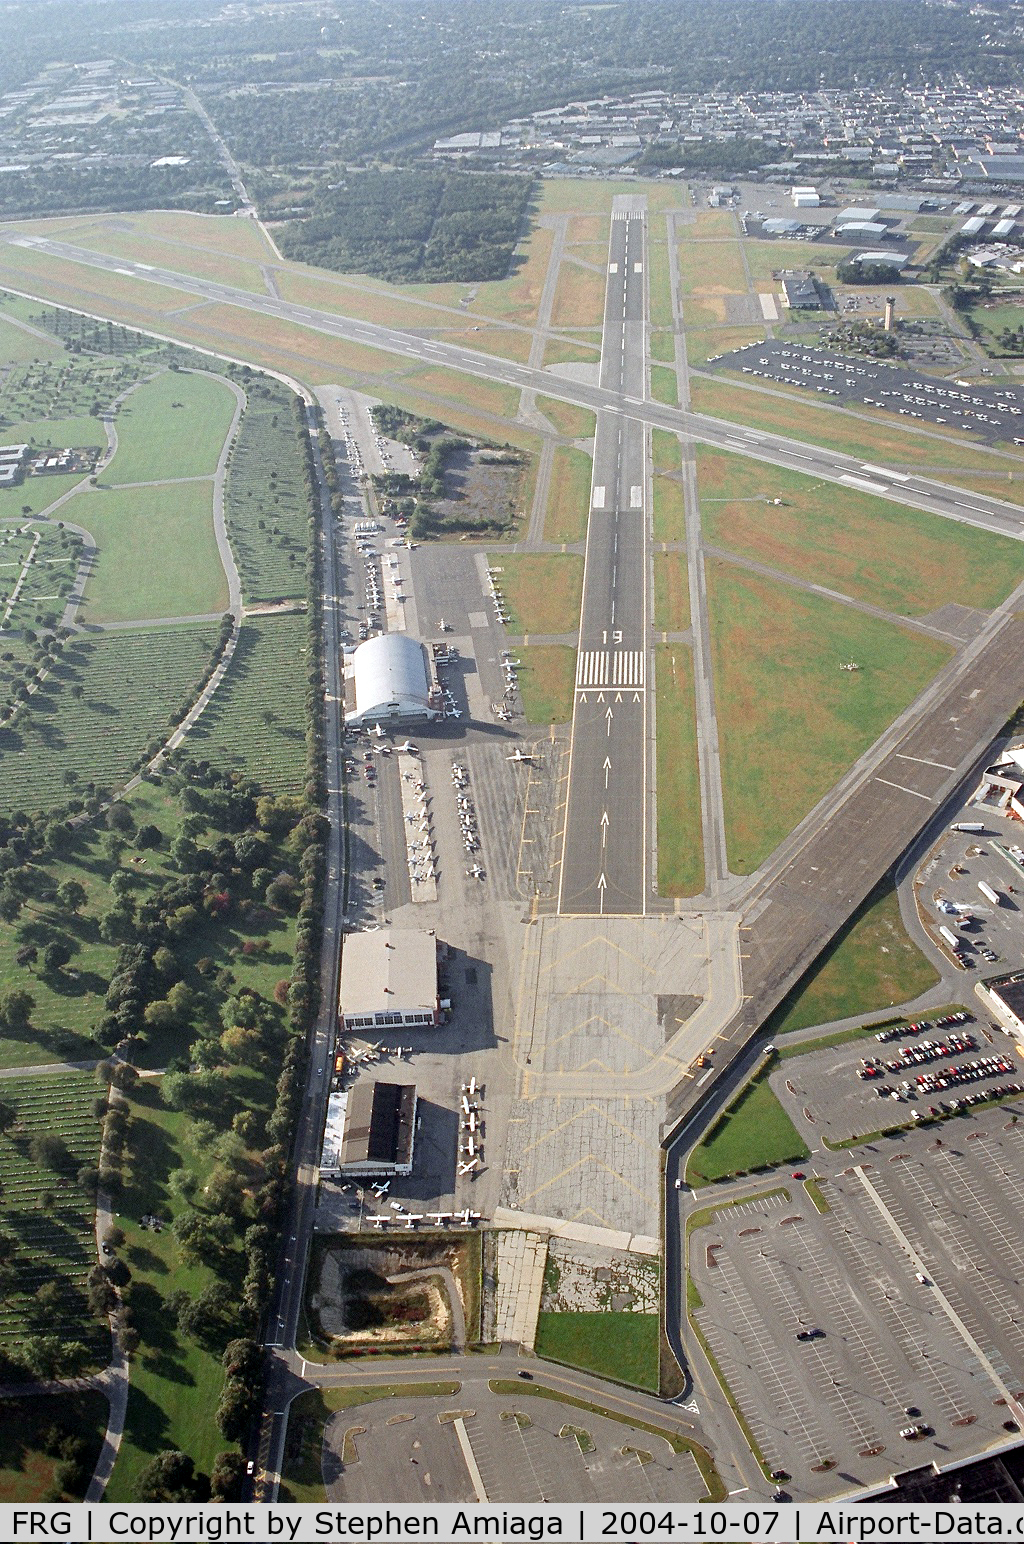 Republic Airport (FRG) - Looking south (RWY 19) over Select Aviation